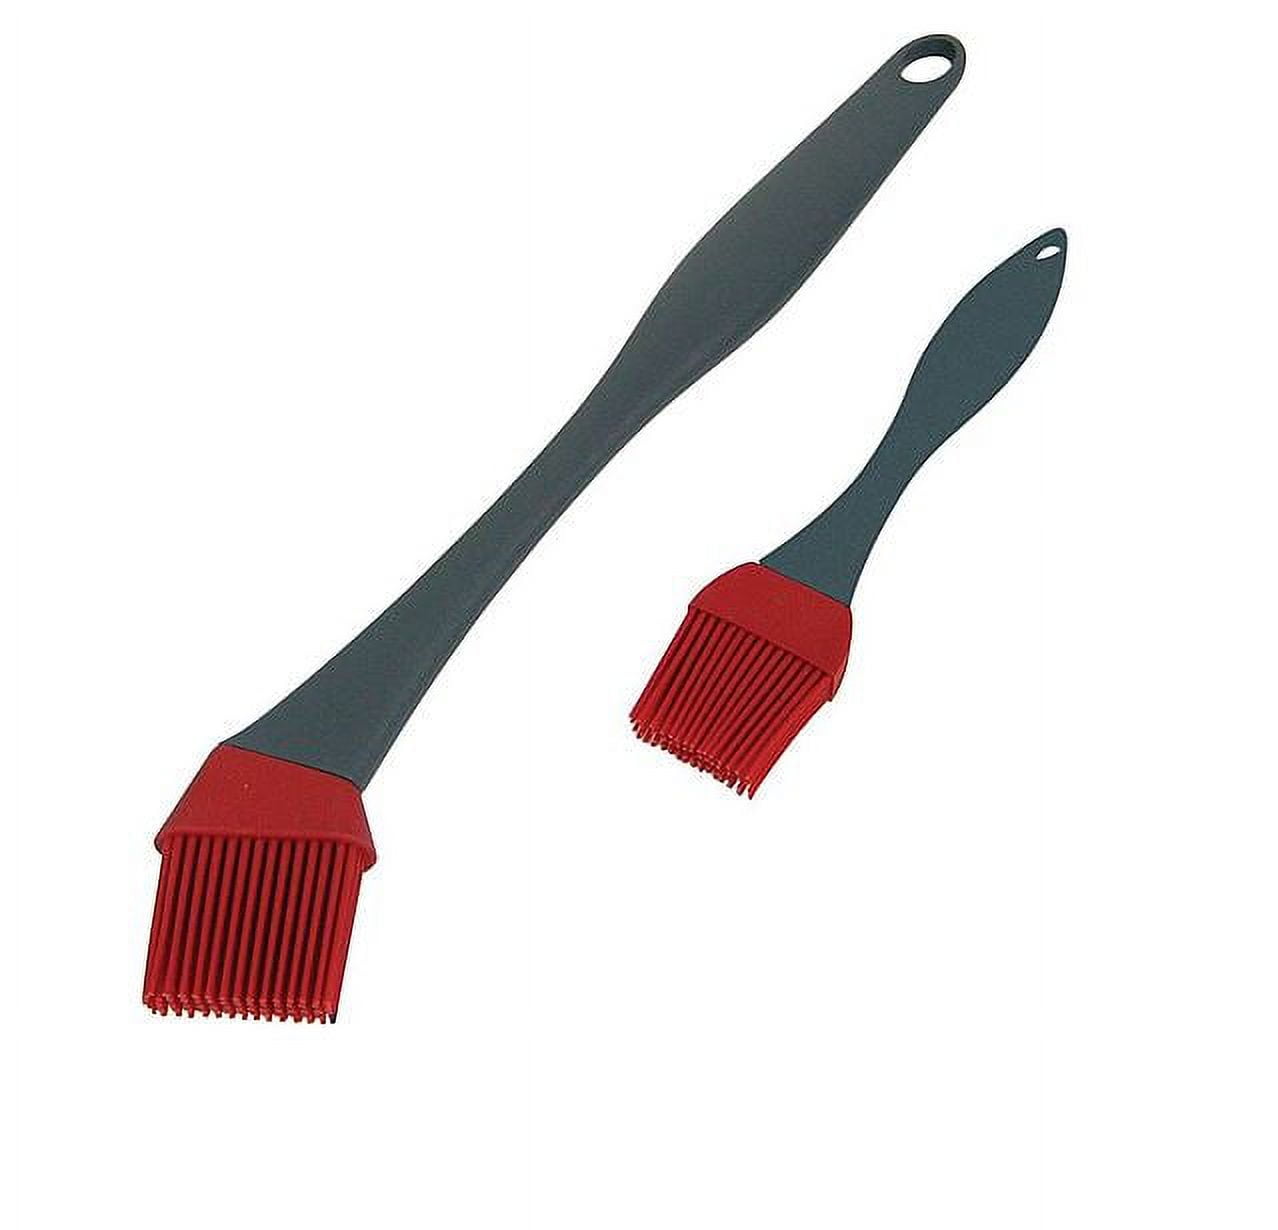 ClickUS Stainless Steel Basting Brush for Cooking, Grilling, Pastry,  Marinating - 2 Pcs Silicone Flat Pastry Brush Price in India - Buy ClickUS  Stainless Steel Basting Brush for Cooking, Grilling, Pastry, Marinating 